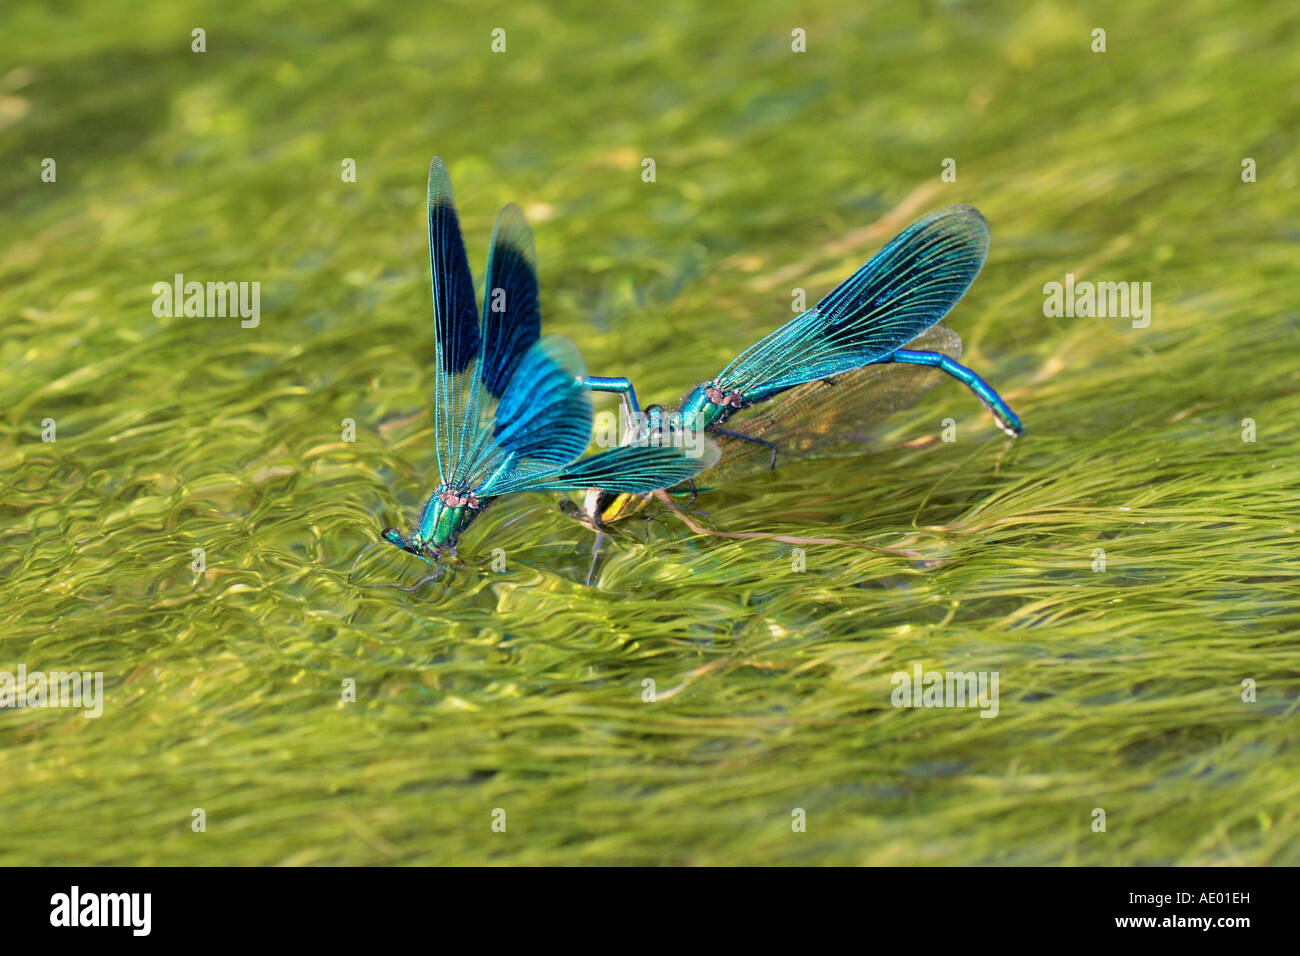 banded blackwings, banded agrion, banded demoiselle (Calopteryx splendens, Agrion splendens), male attacking couple laying eggs Stock Photo